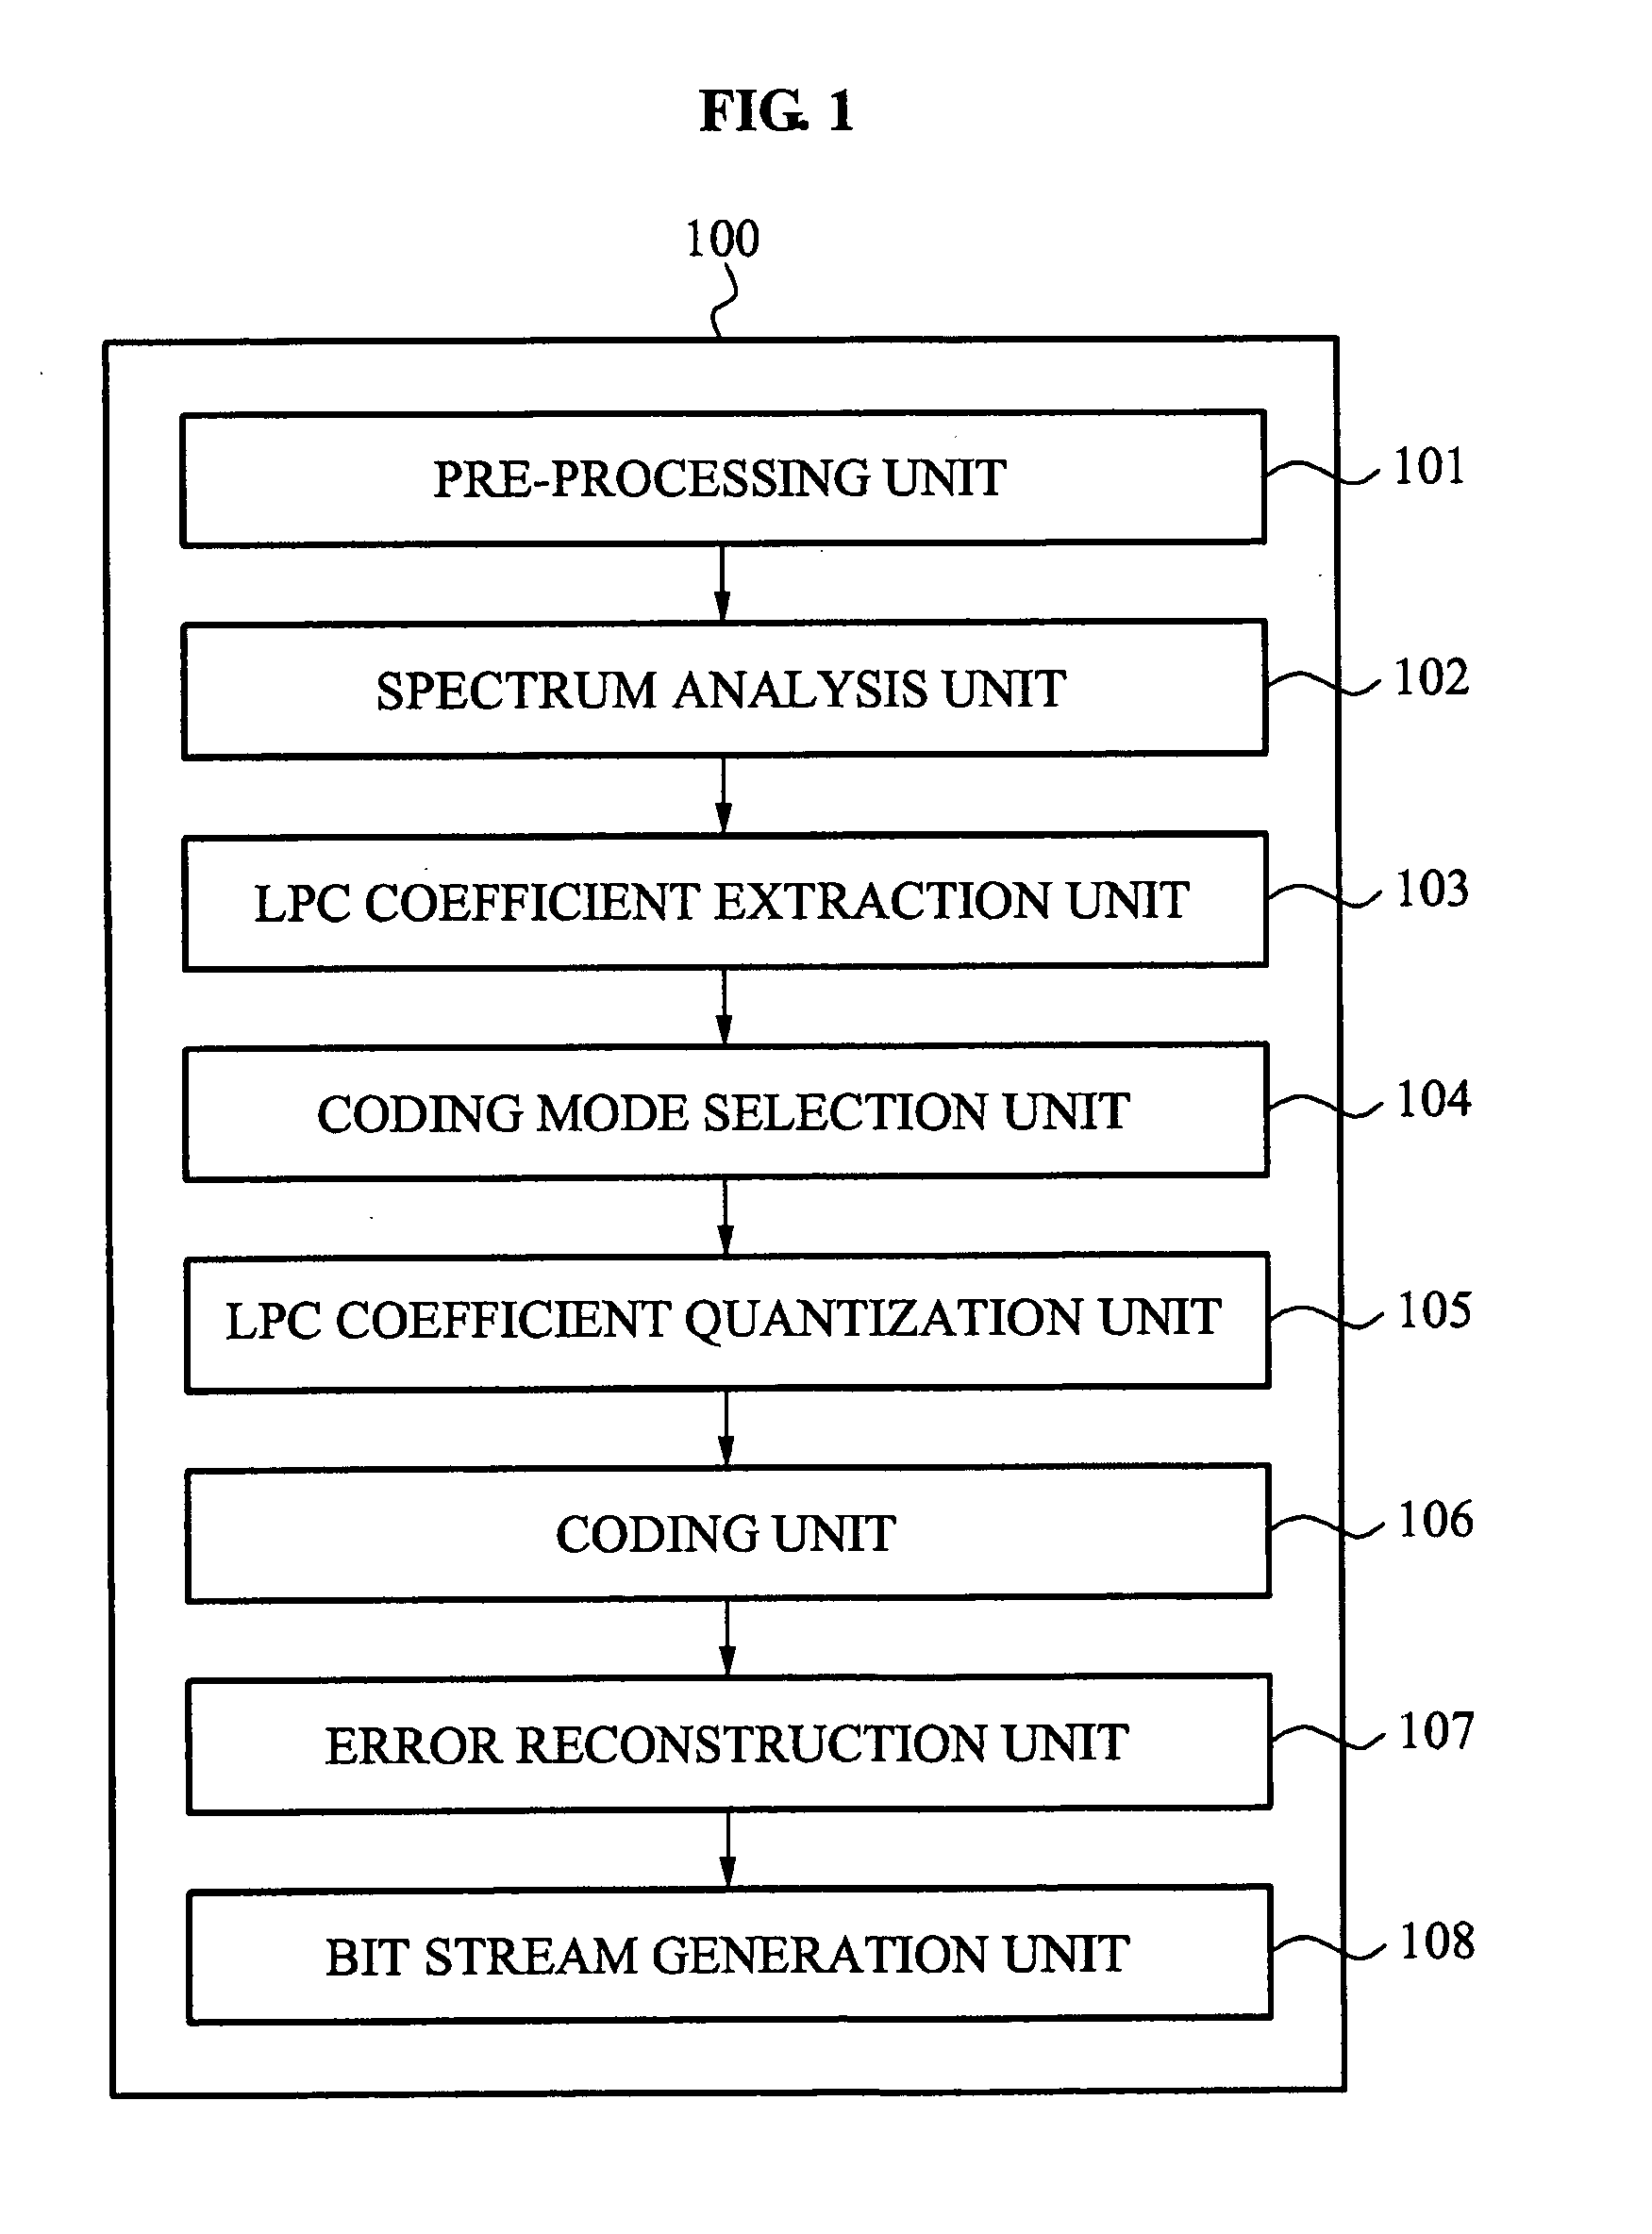 Apparatus and method determining weighting function for linear prediction coding coefficients quantization